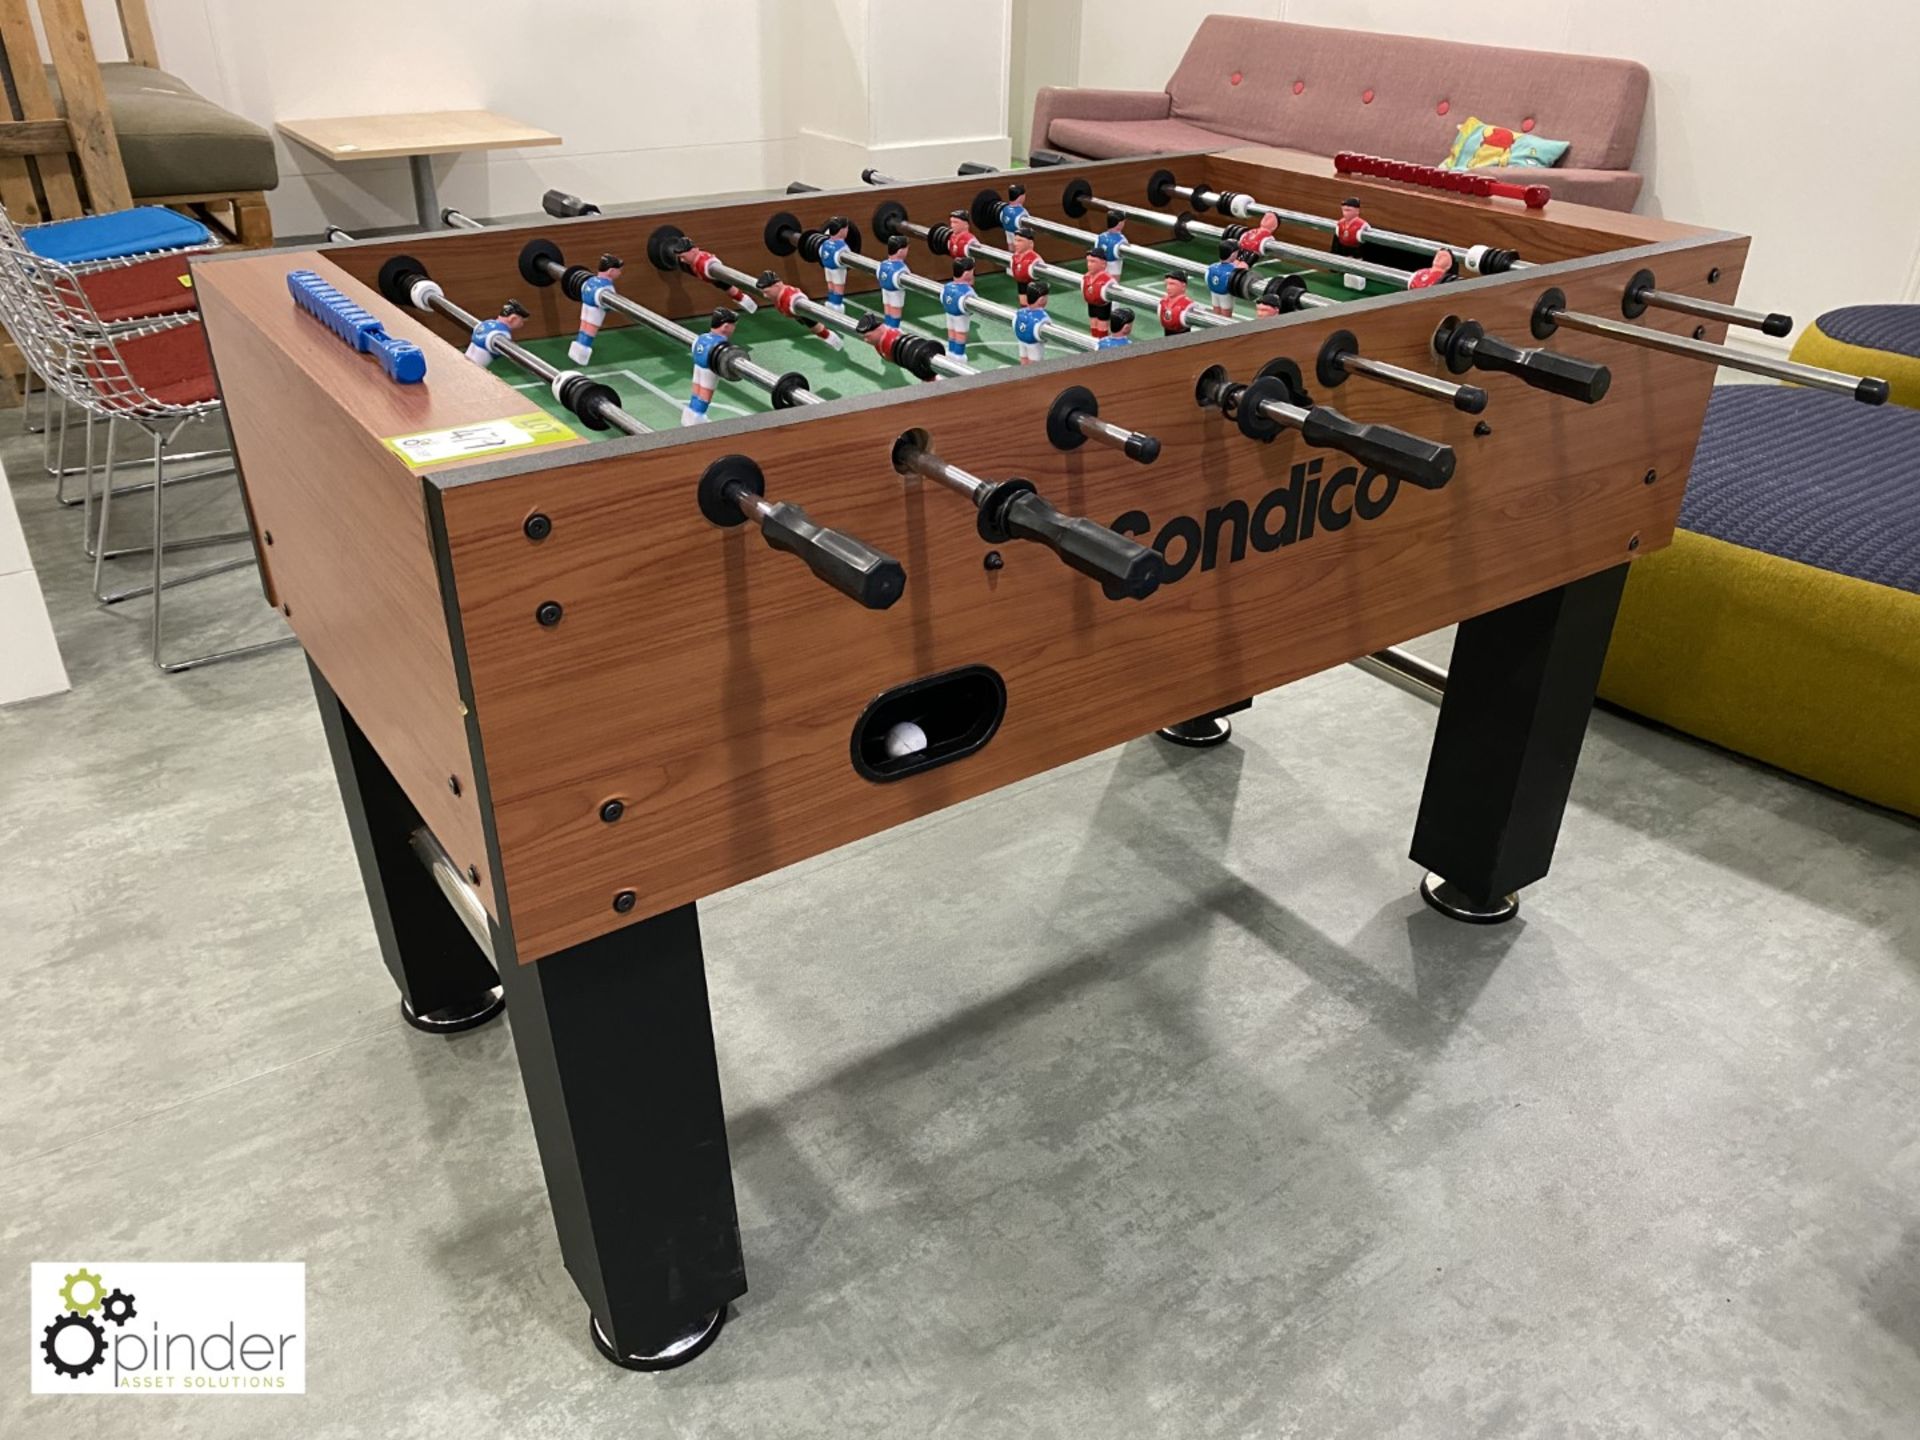 Sondico Football Table (located in Breakout Area, 4th Floor) **** please note this lot needs to be